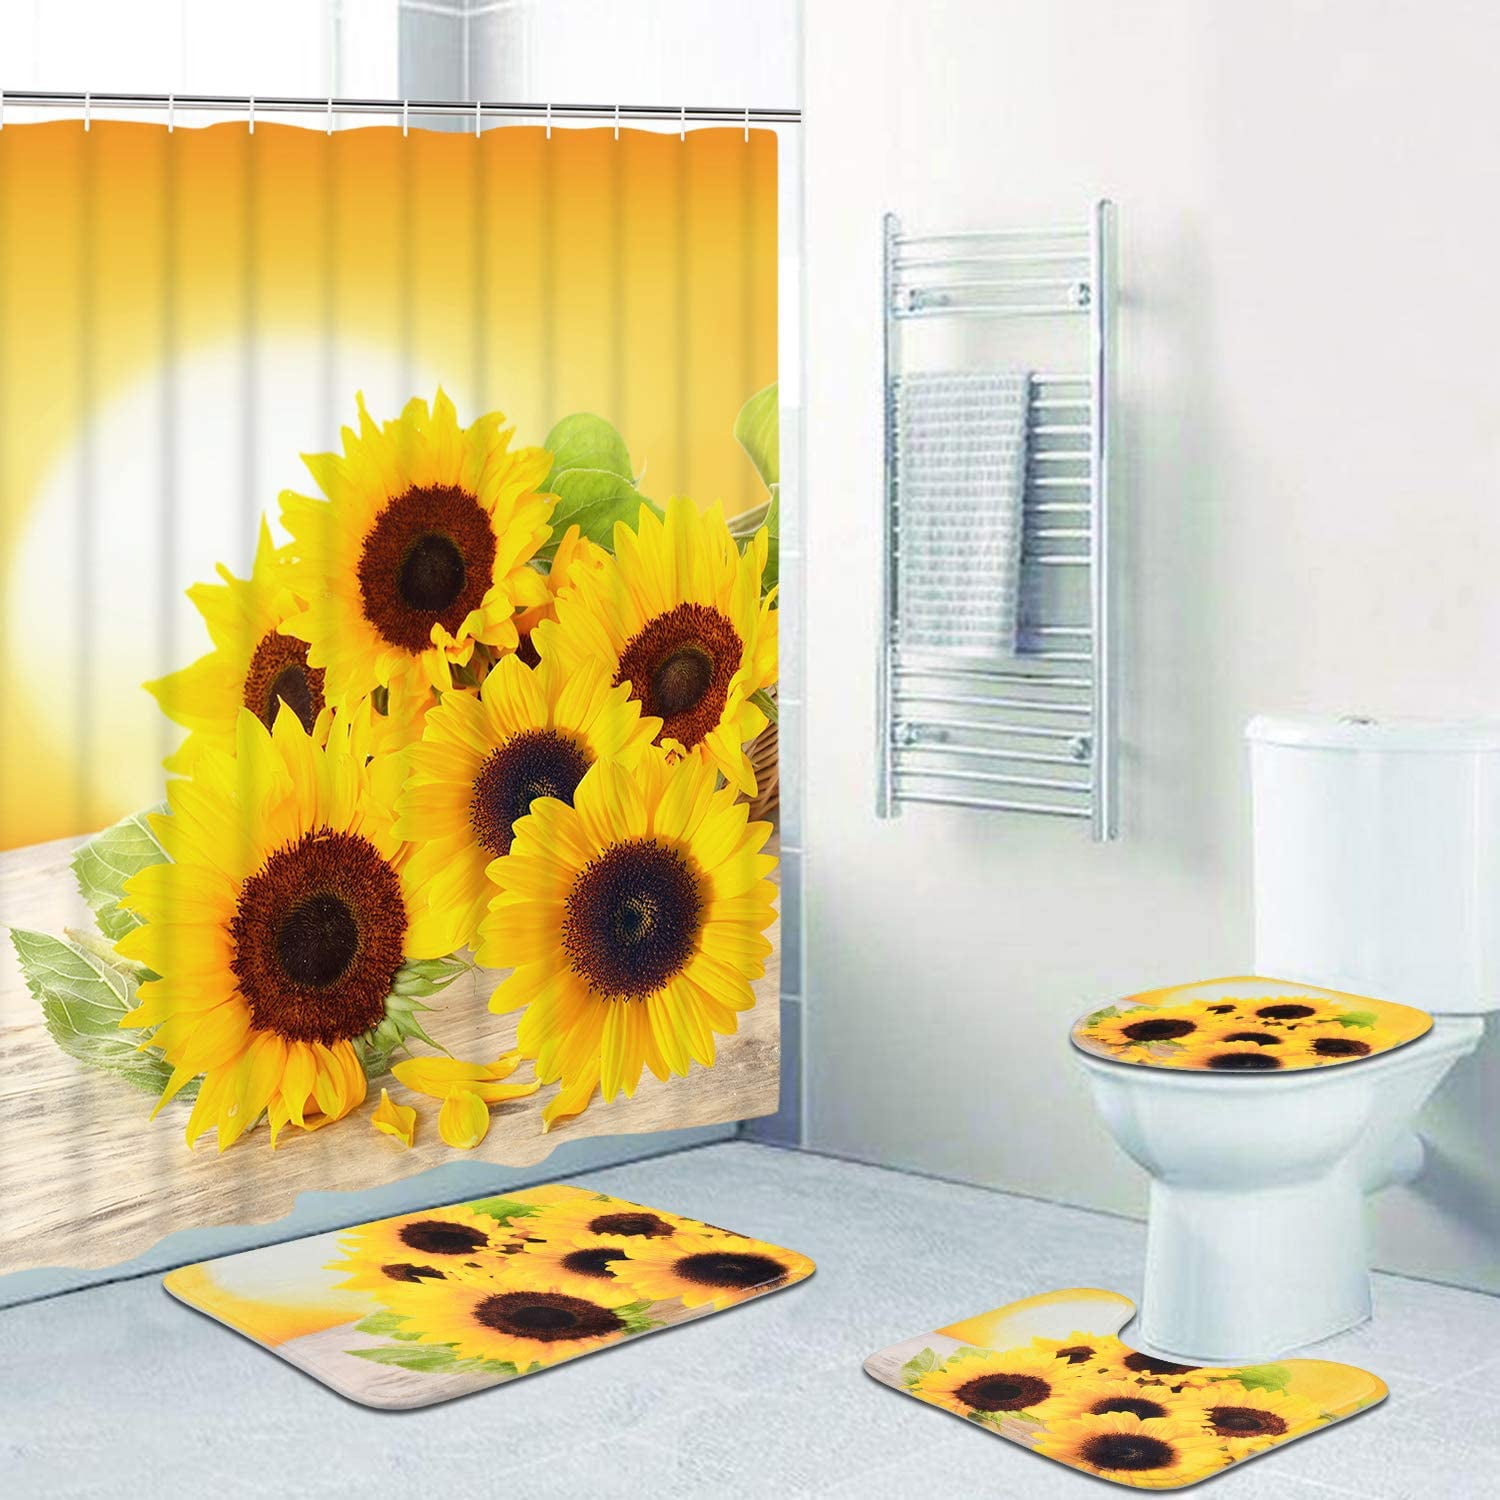 Sunshine Sunflower Butterfly Shower Curtain Rustic Plank Bathroom Accessory Sets 